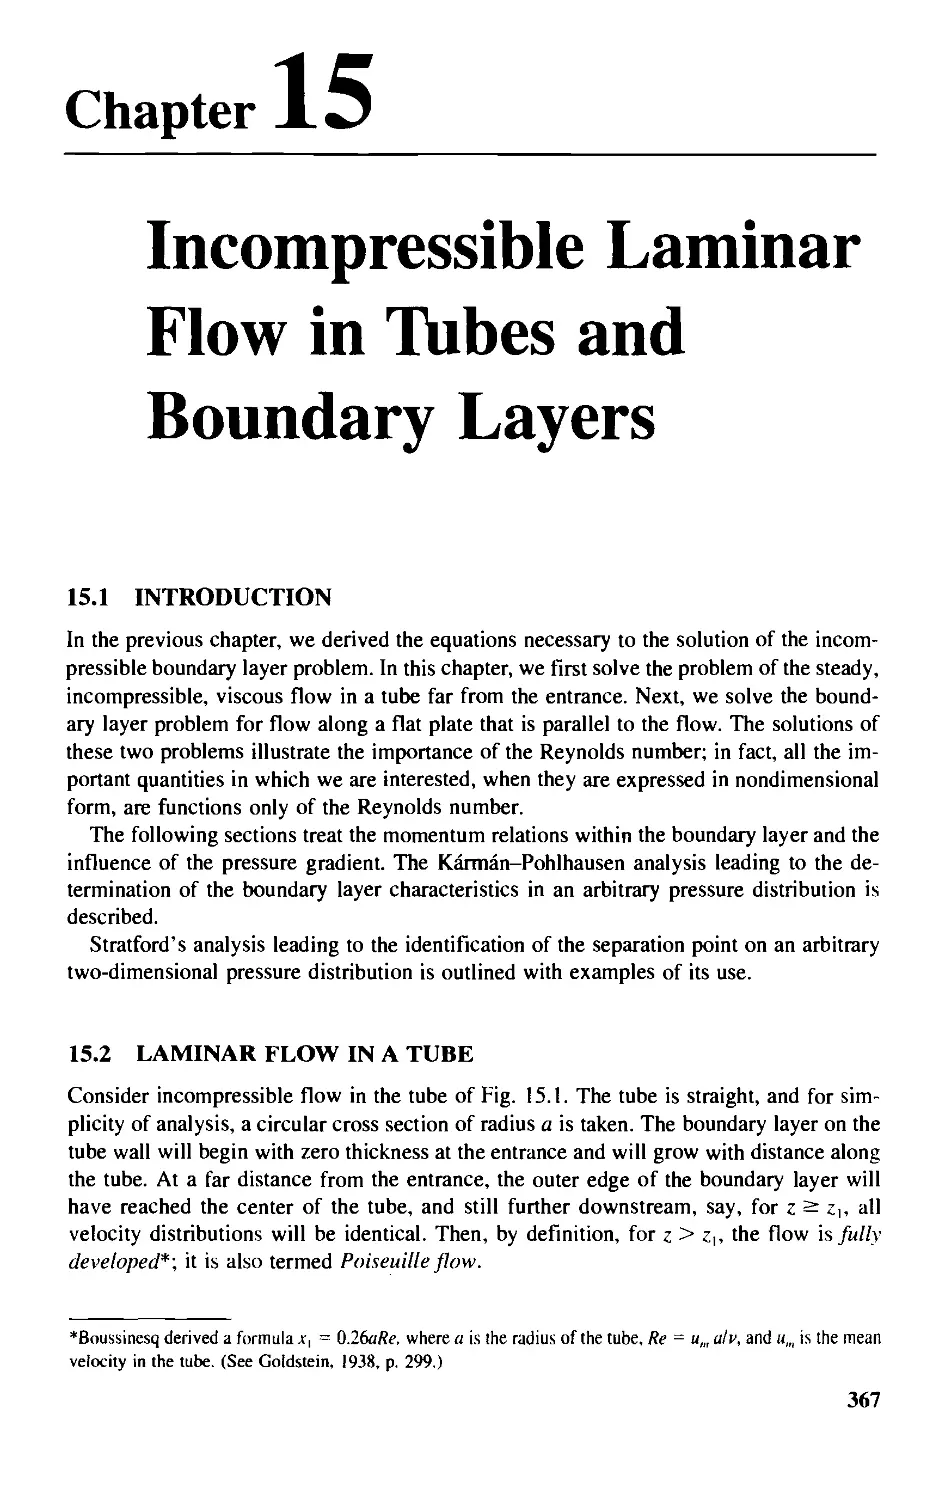 Chapter 15 - Incompressible Laminar Flow in Tubes and Boundary Layers
15.2 - Laminar Flow in a Tube